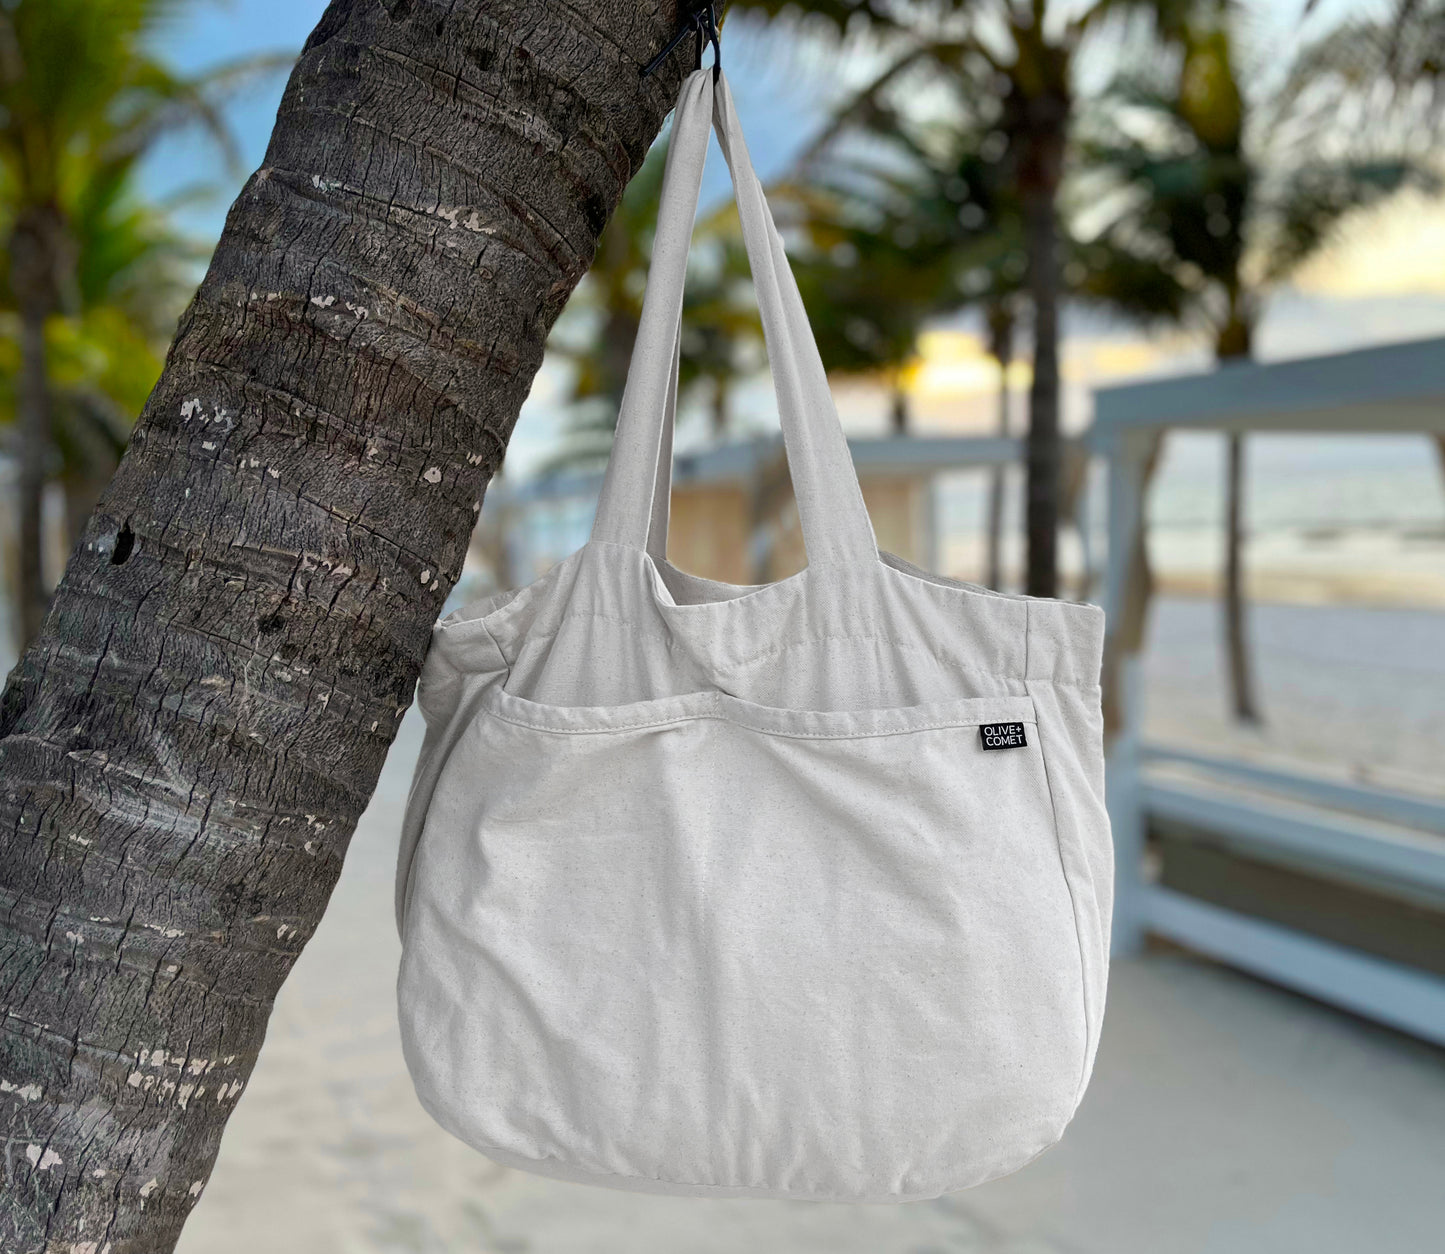 A Sonoma bag hangs peacefully from a palm tree. Behind it lies a tropical beach at sunrise, dotted by Bali beds.